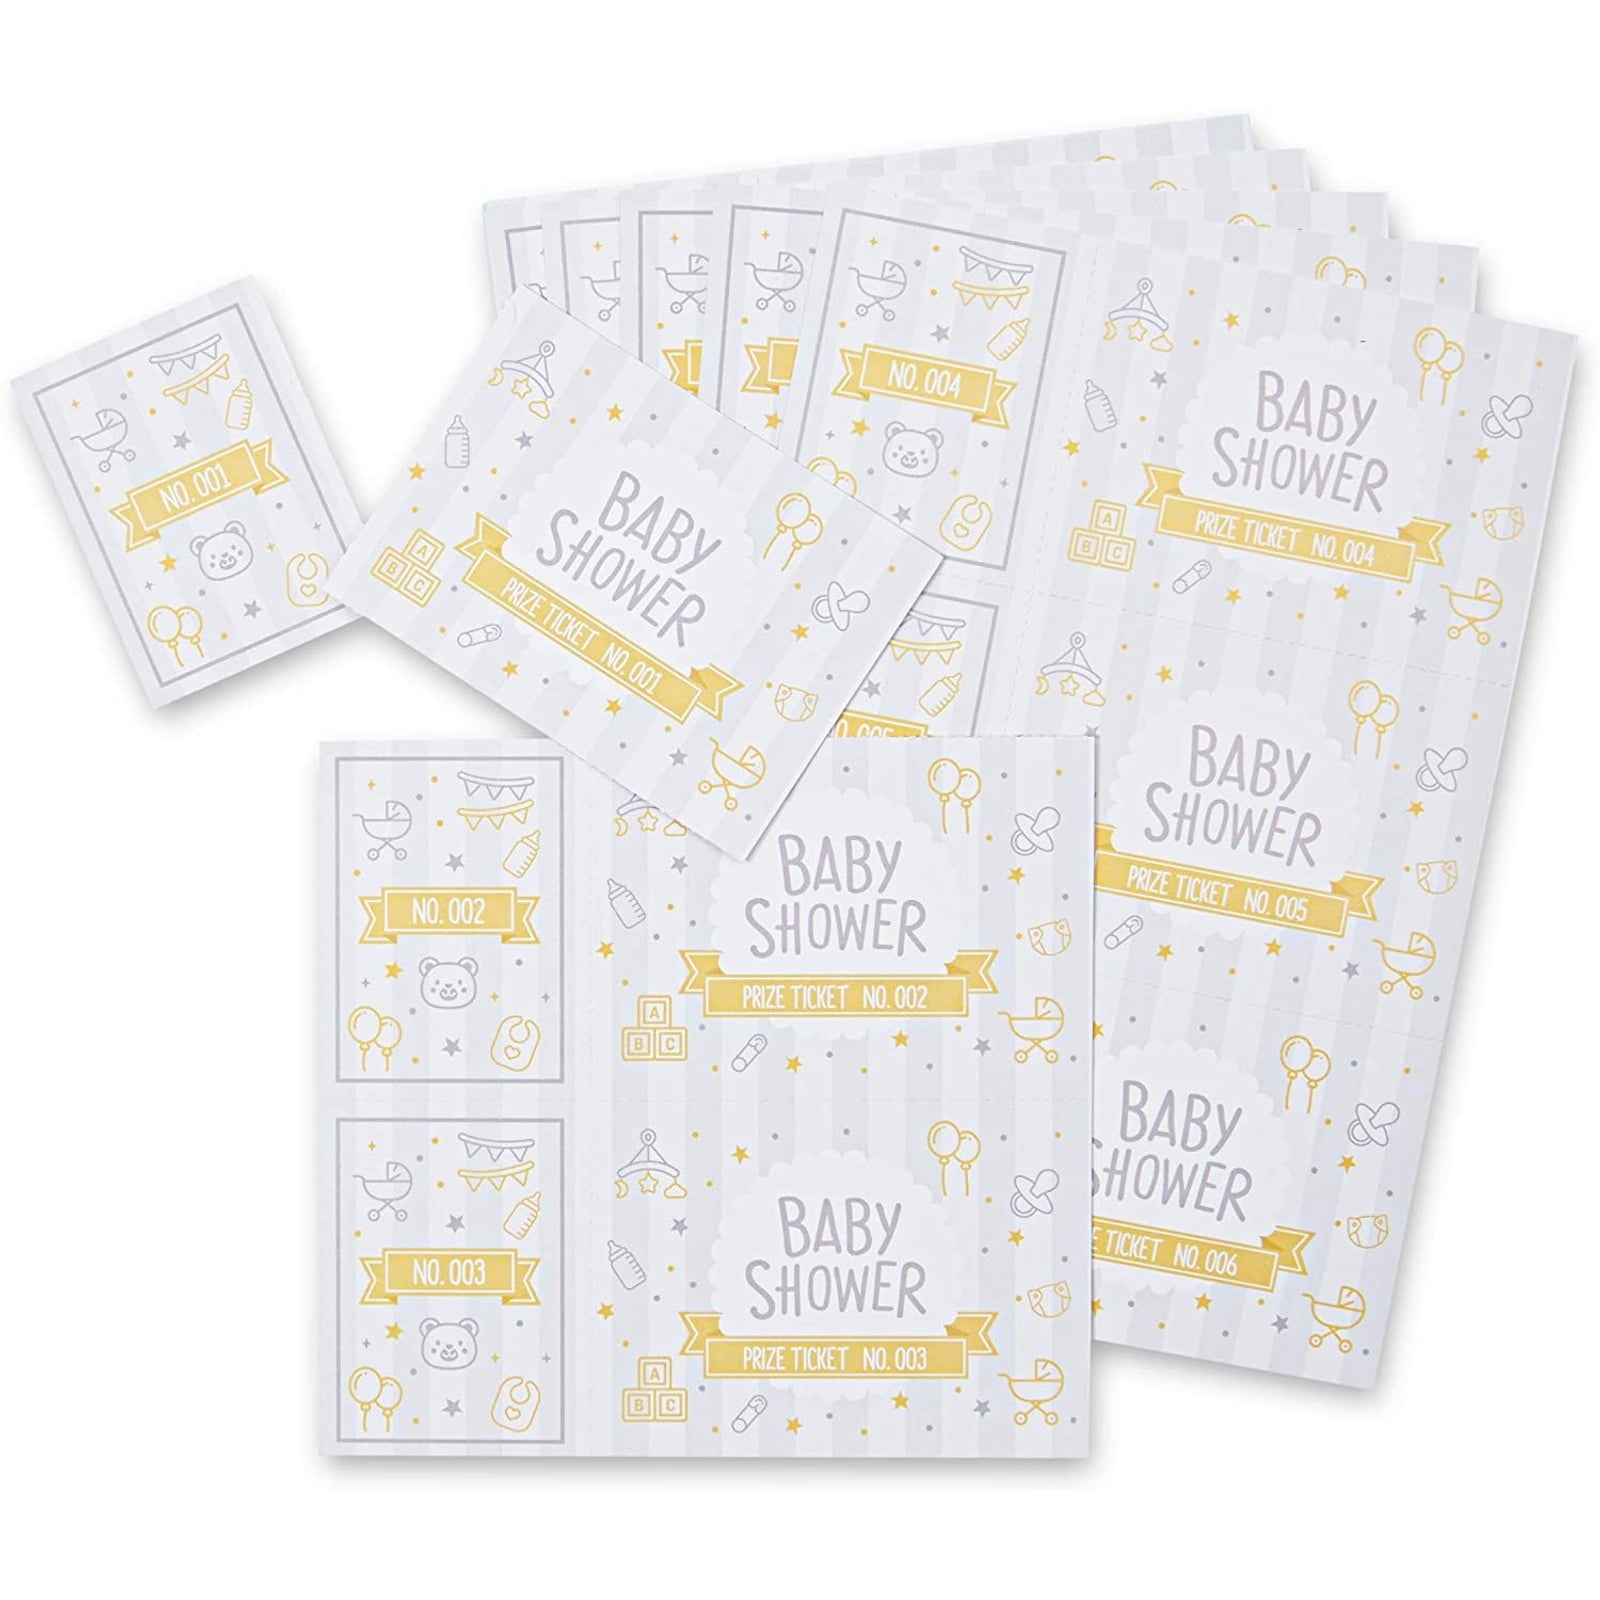 60 Colorful Diaper Raffle Tickets Gender Neutral Baby Shower Game